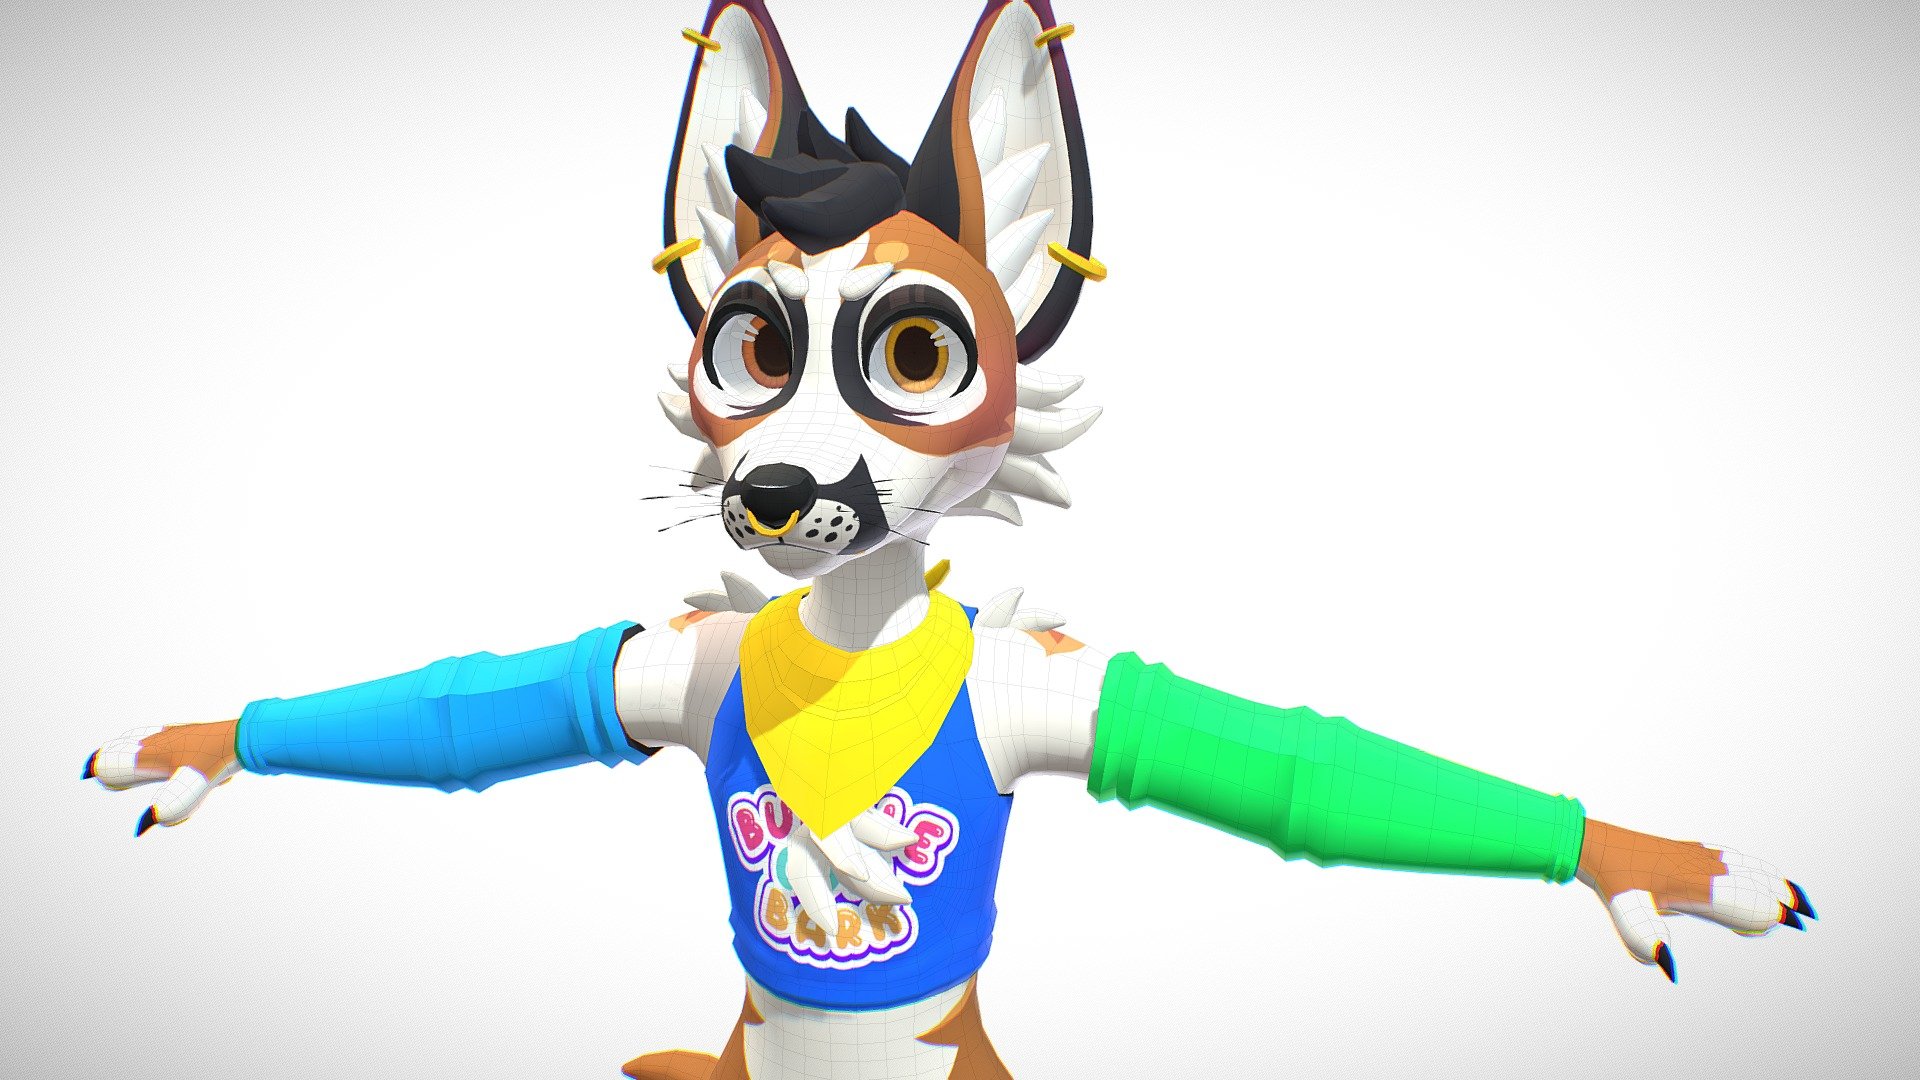 made in zbrush, blender, unity, and substance painter - Pride Pup VRChat Base - 3D model by bubblegumbark 3d model